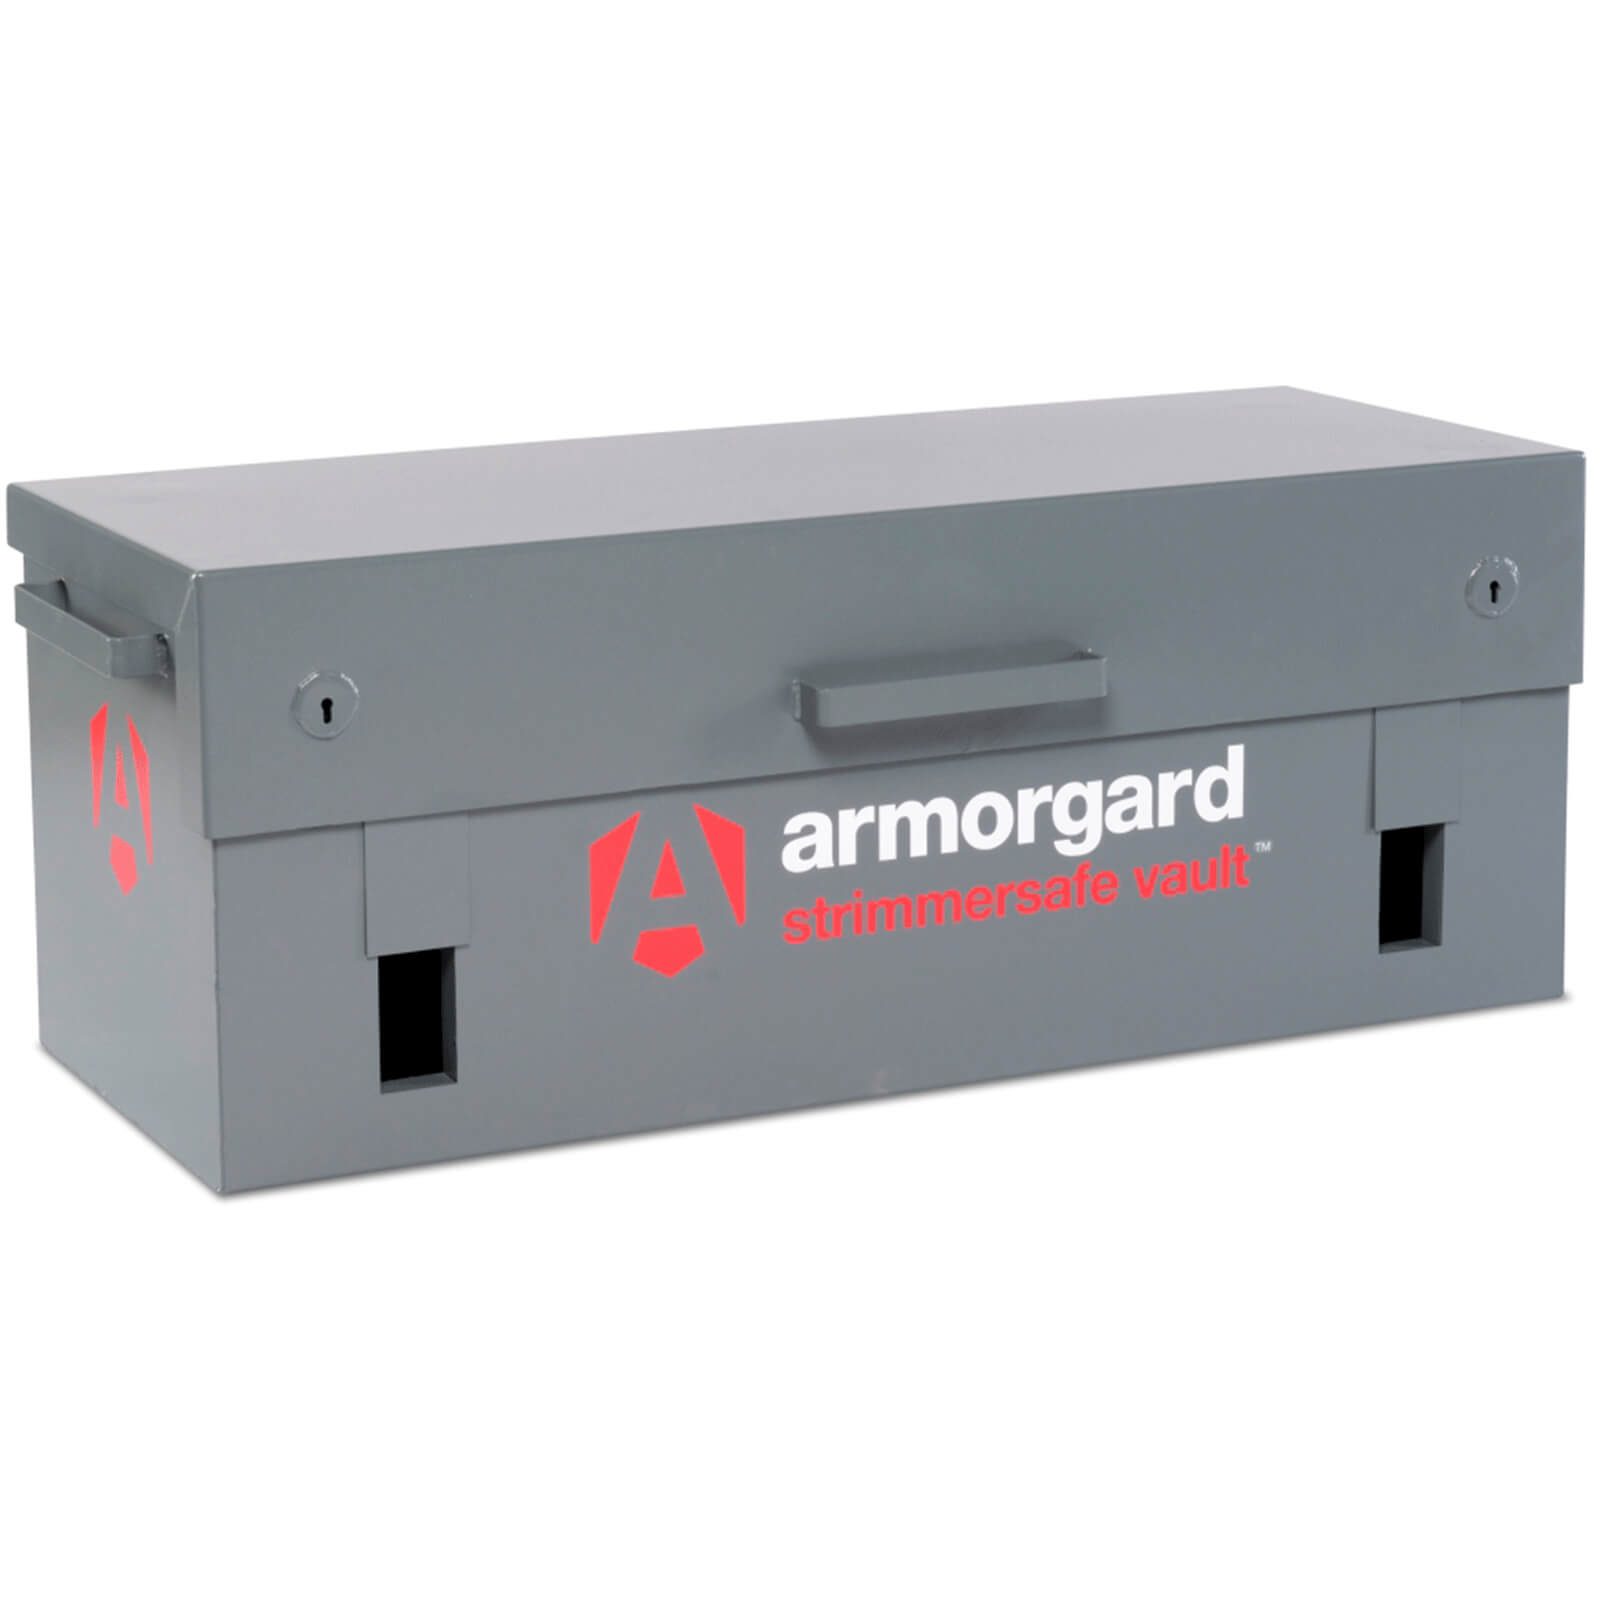 Photo of Armorgard Strimmersafe Secure Vault 1275mm 515mm 450mm